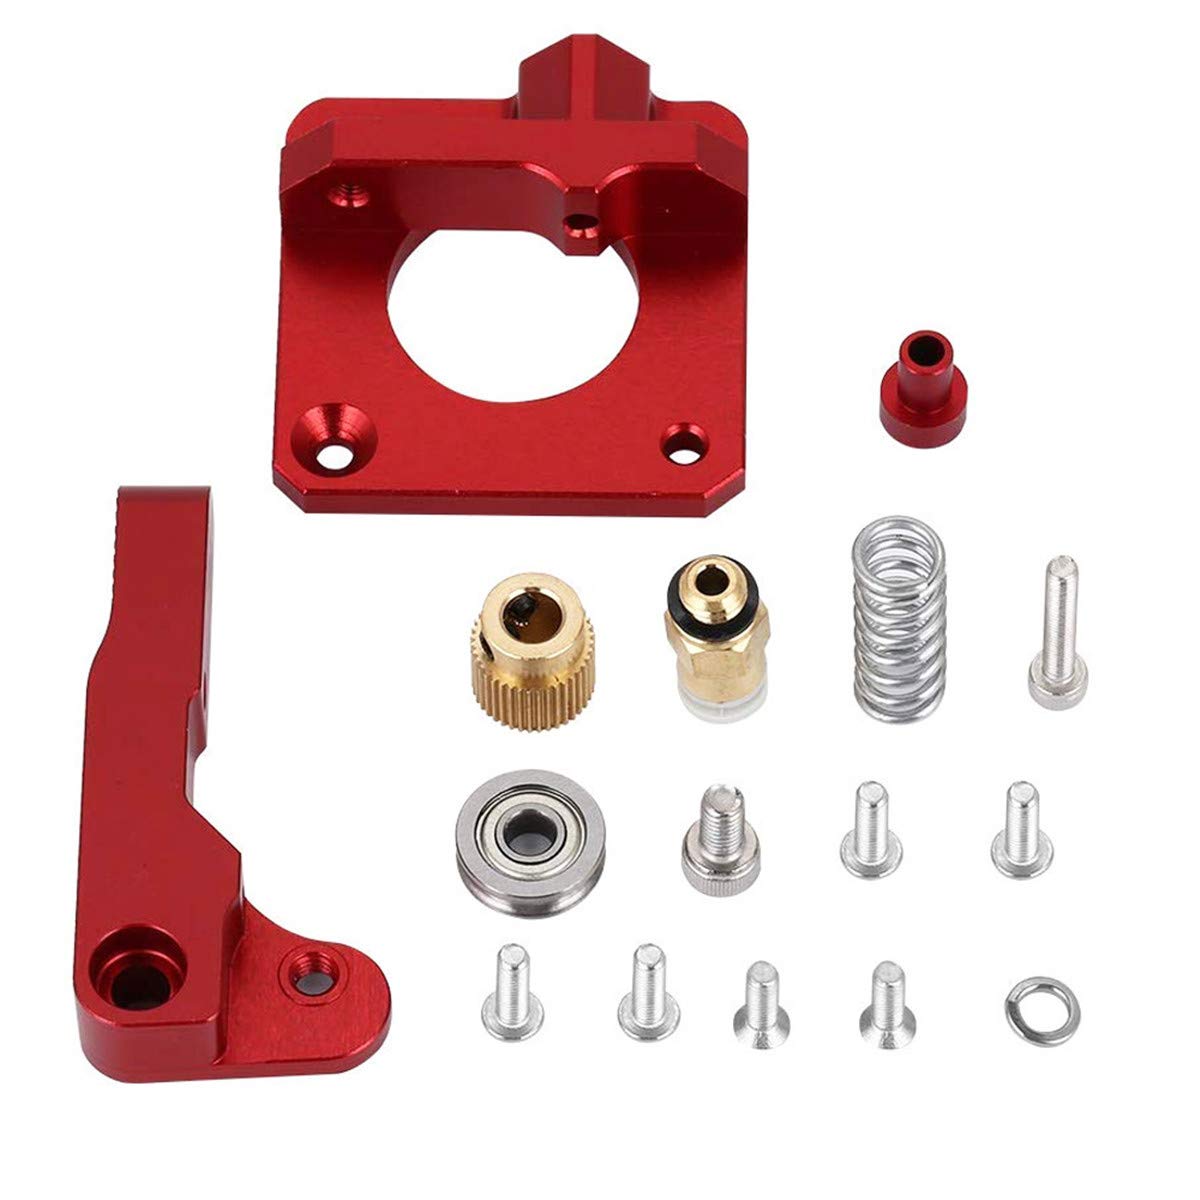 Upgraded Replacement Aluminum MK8 Extruder Drive